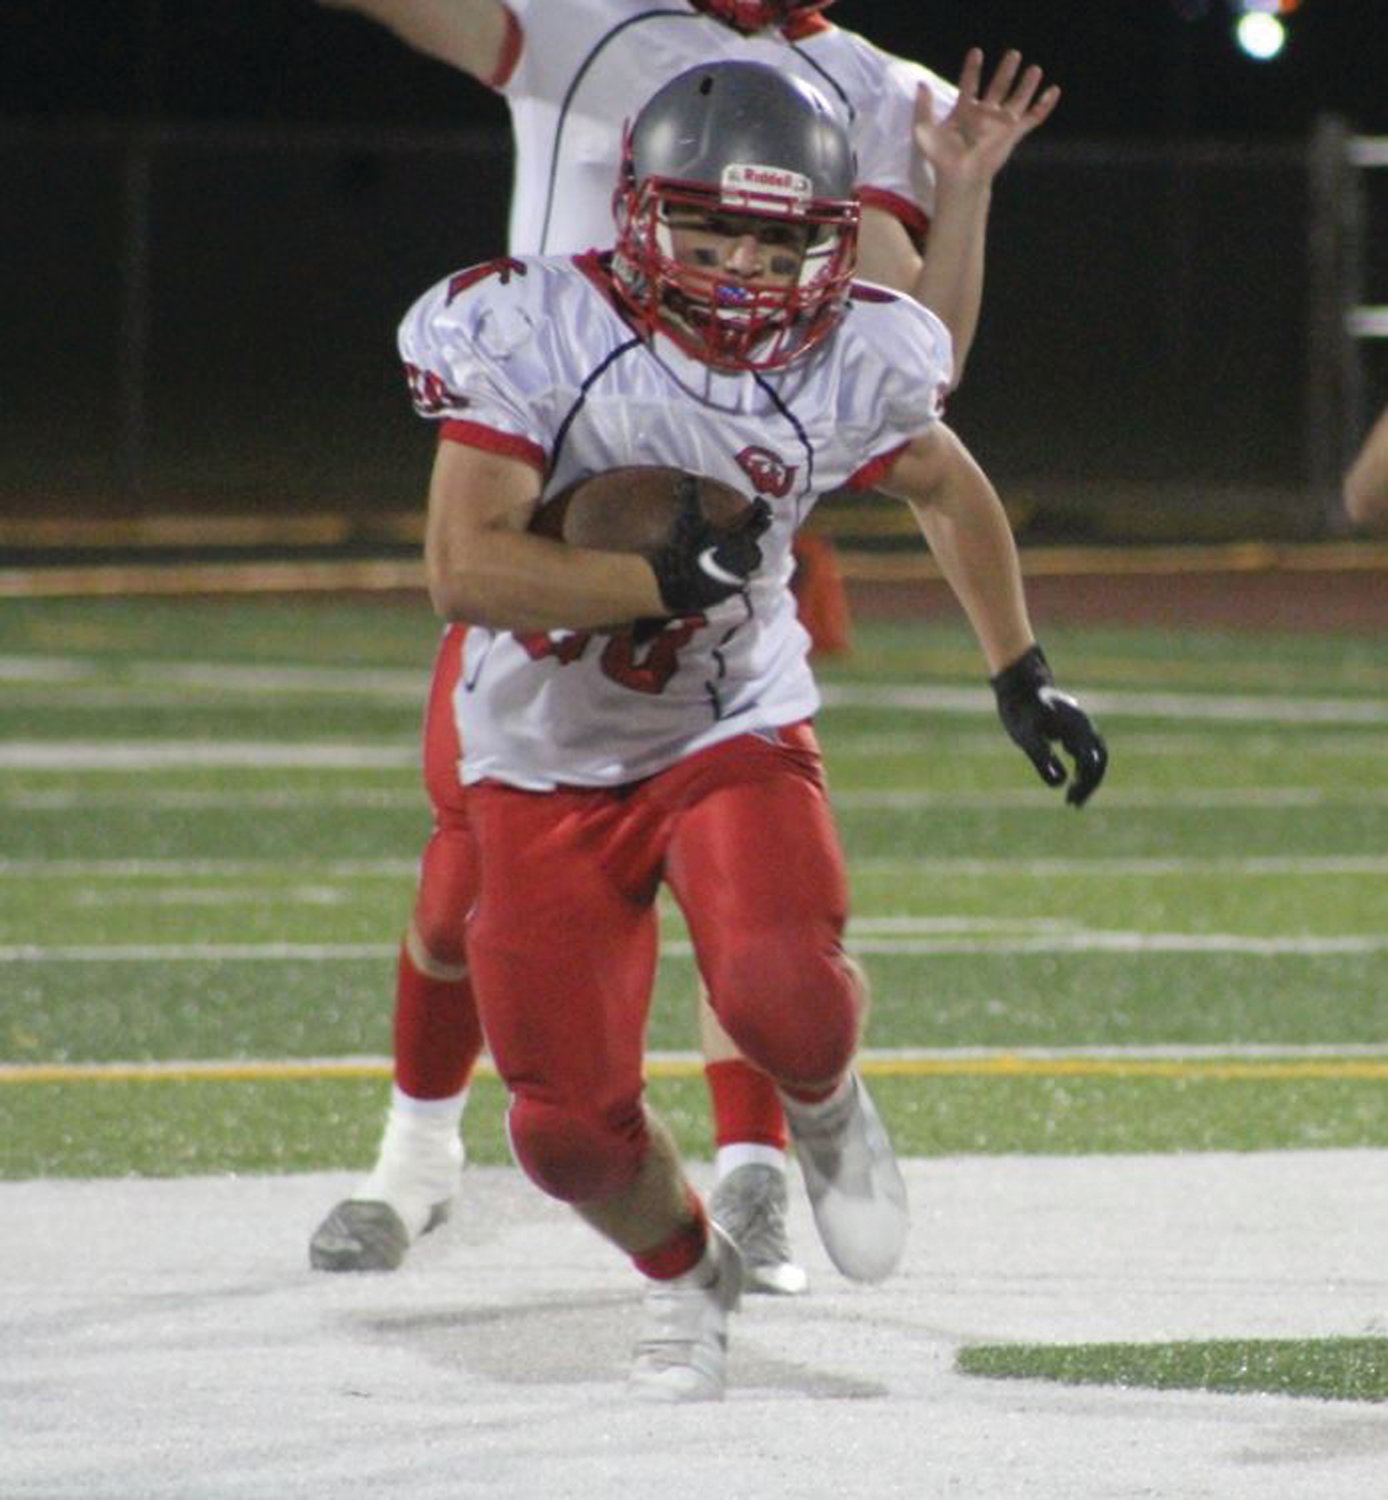 UP THE GUT: West’s Dimitri LeBlanc picks up some yards.